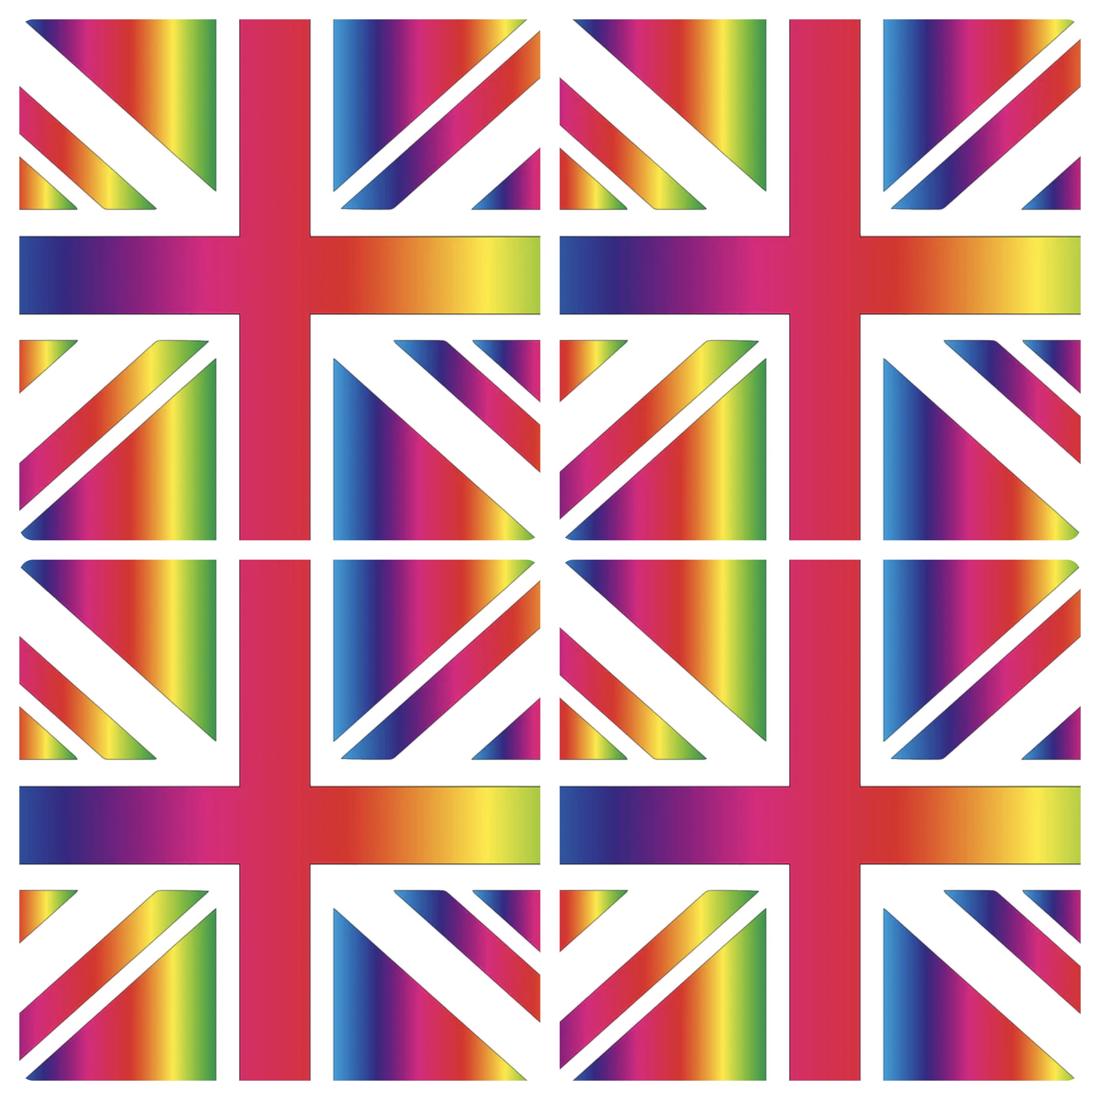 Special Offer! 4 Rainbow Union Jack Cushion Panels for £6